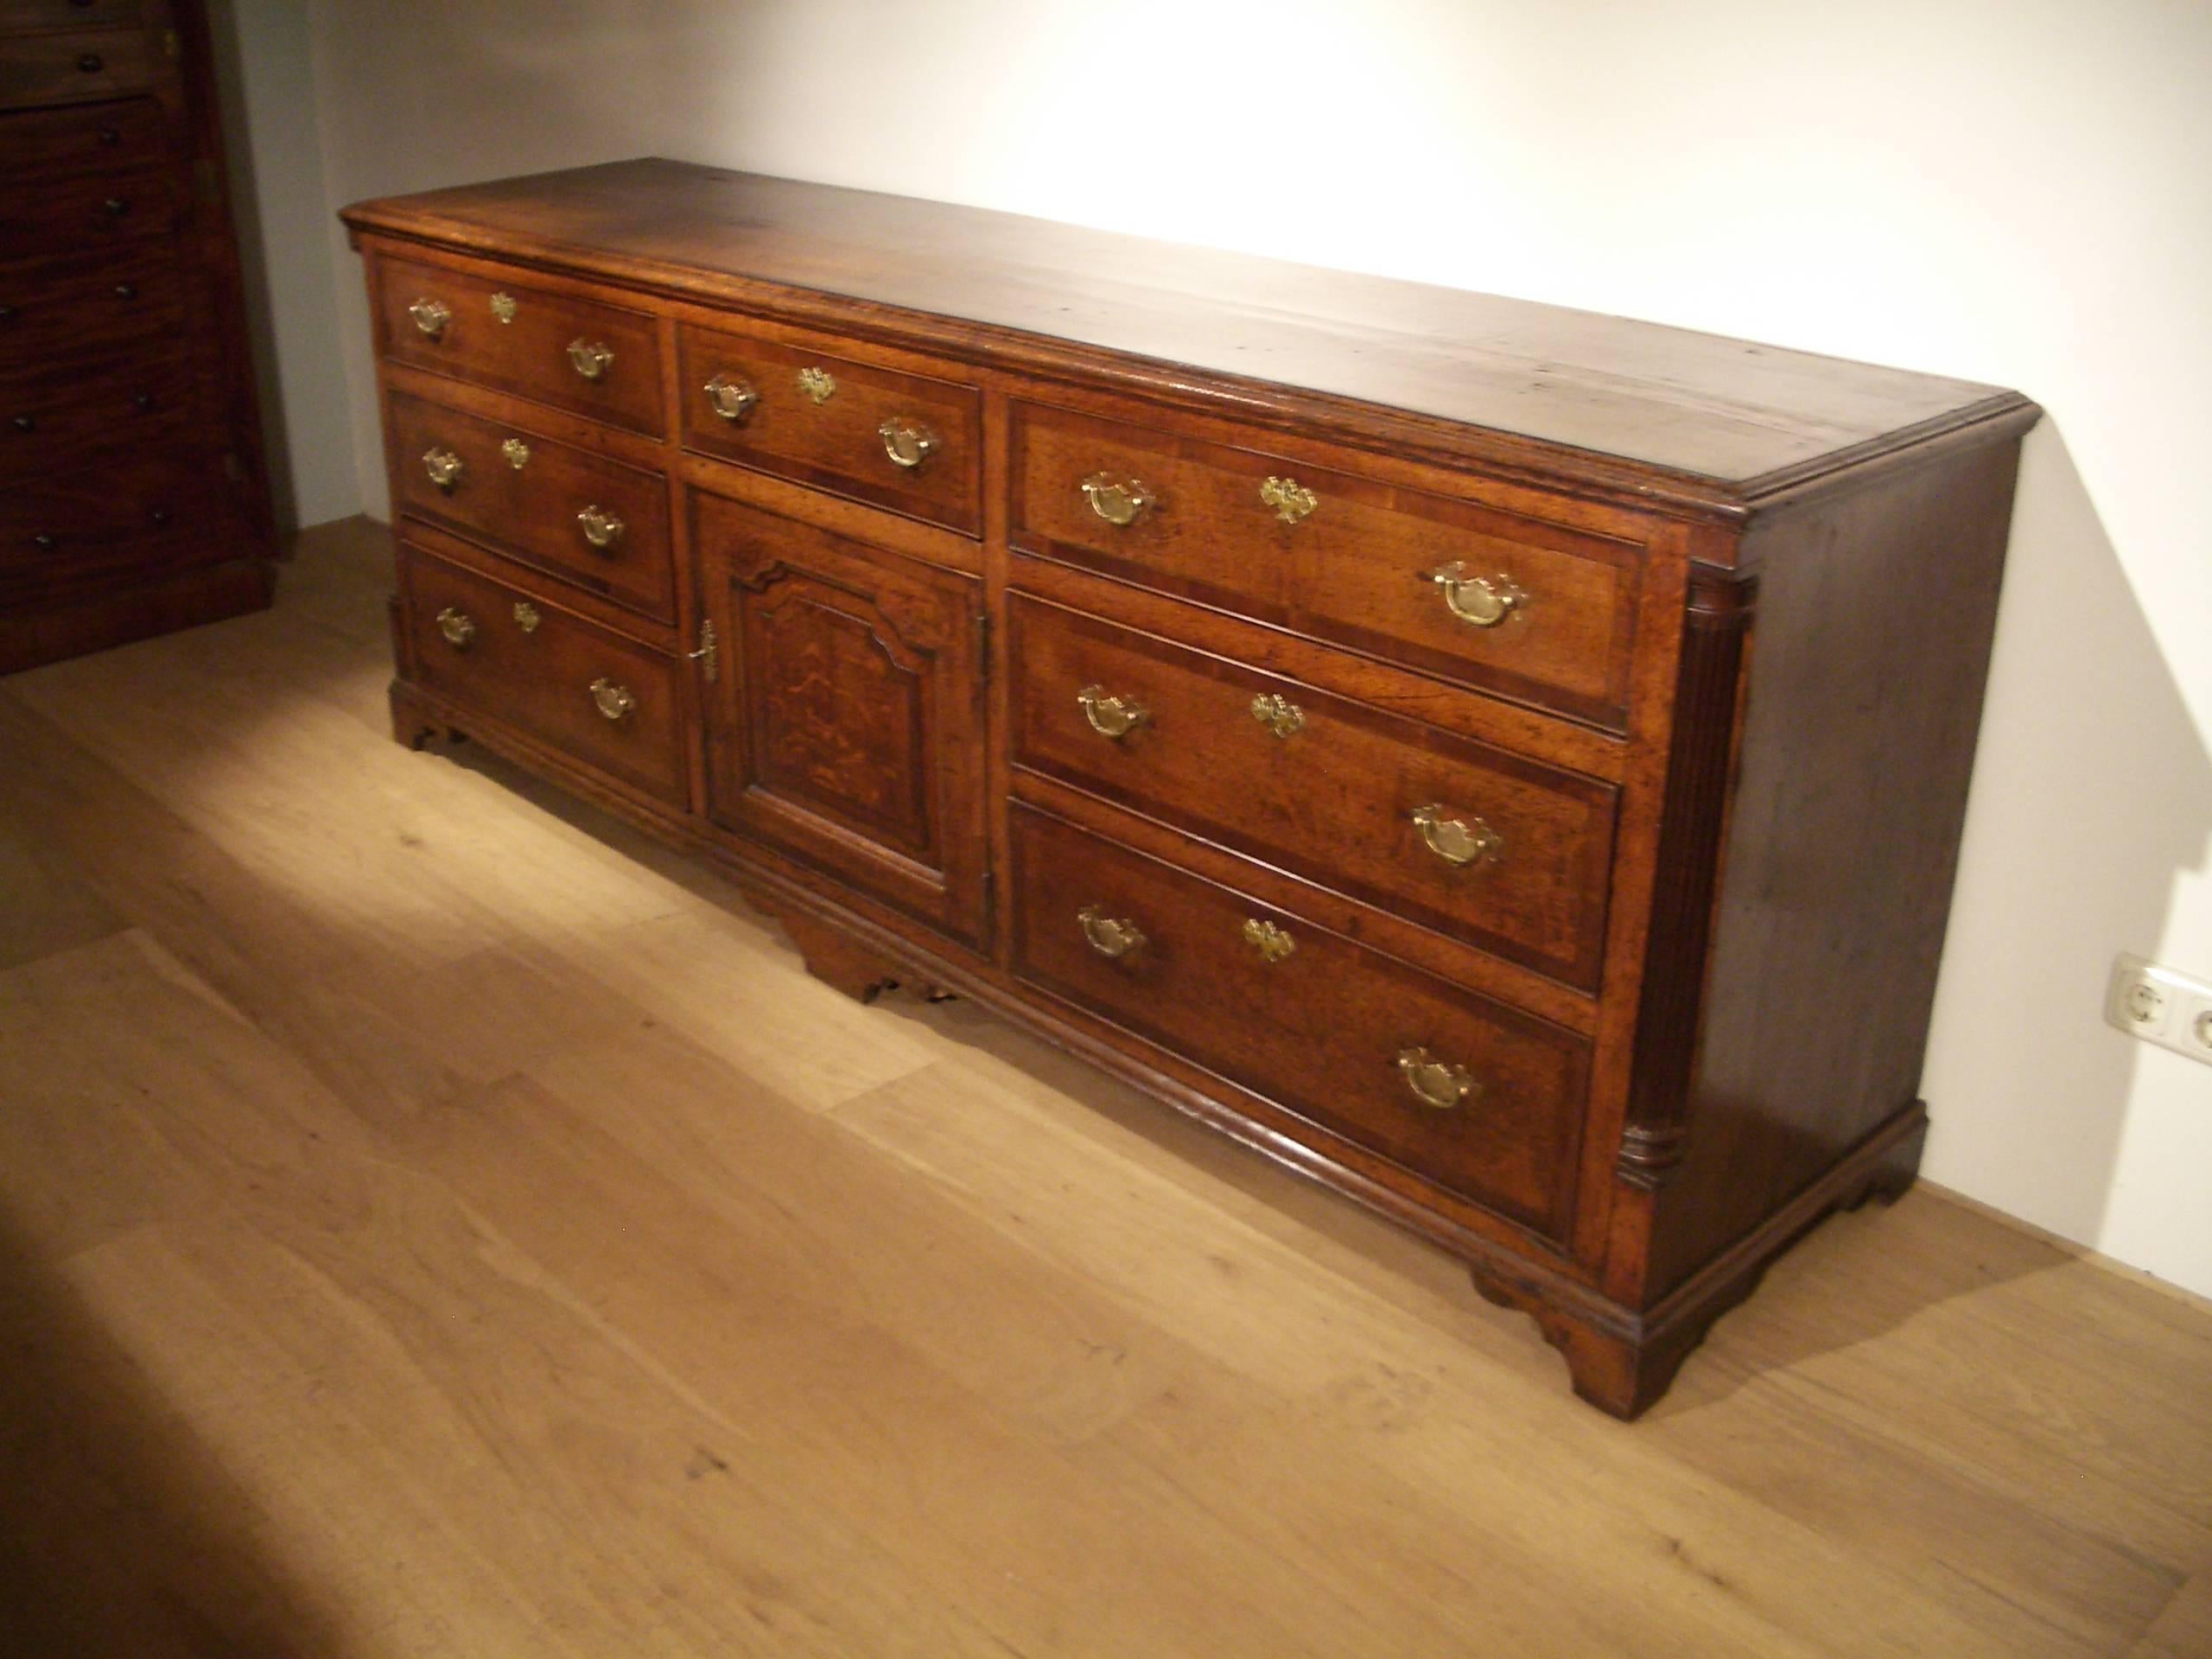 Beautiful and unique 18th century oak dresser. All in perfect and original condition. The drawers, door and top are crossbanded with mahogany. Corners feature fluted pillars this gives a grand appearance. The size of this sideboard is very special.